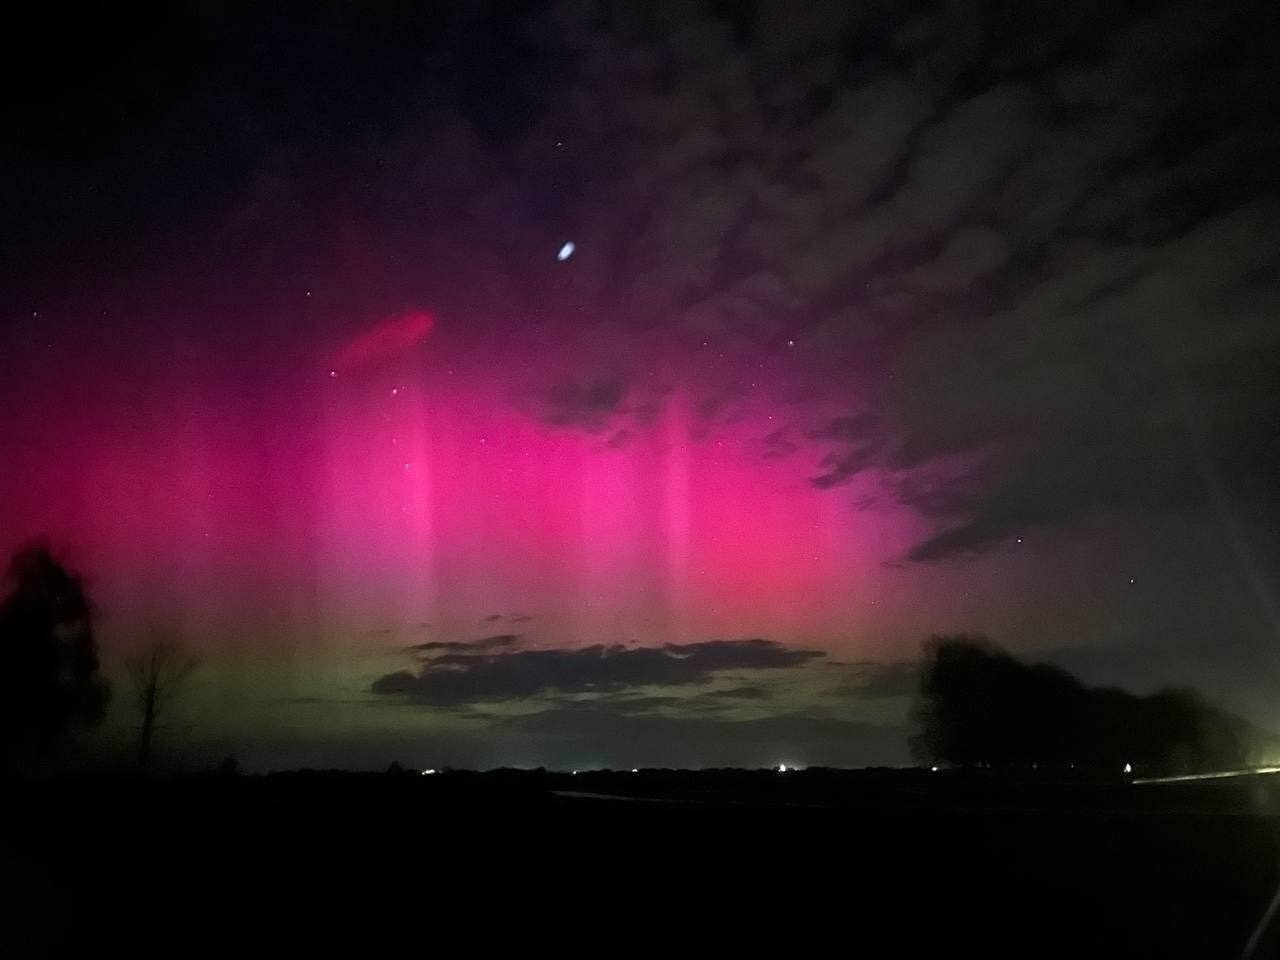 The Northern lights in the sky over Sumy.